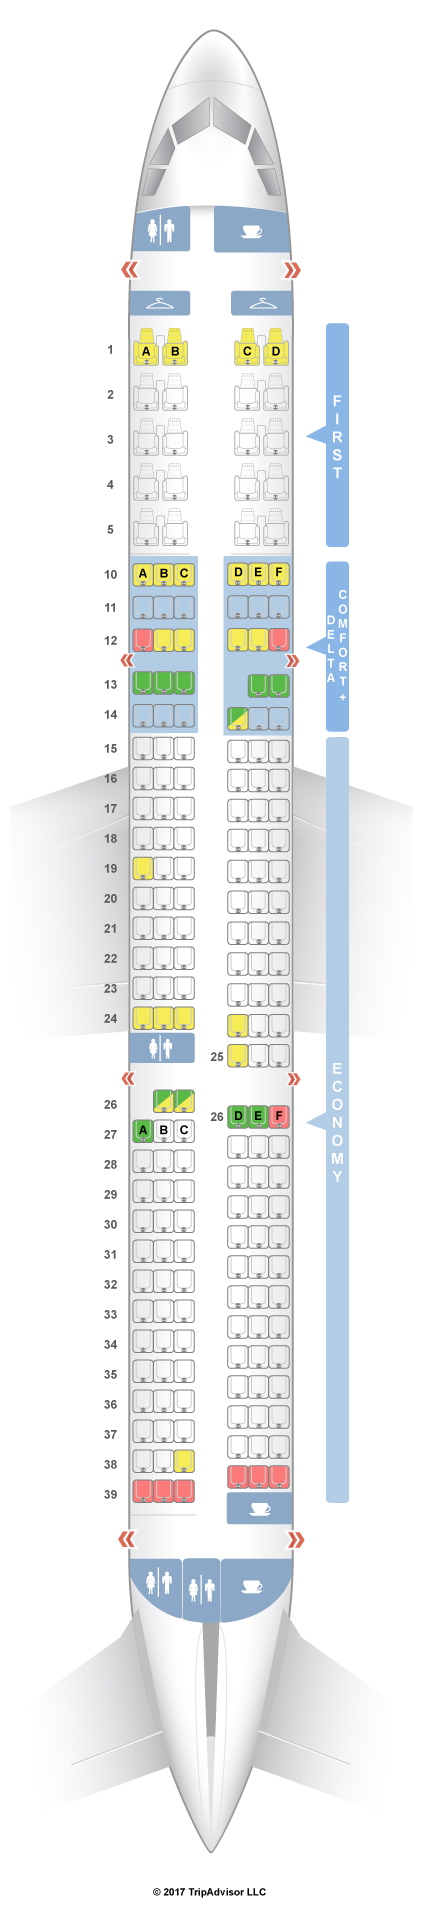 Delta Airlines Airbus A321 Seat Map